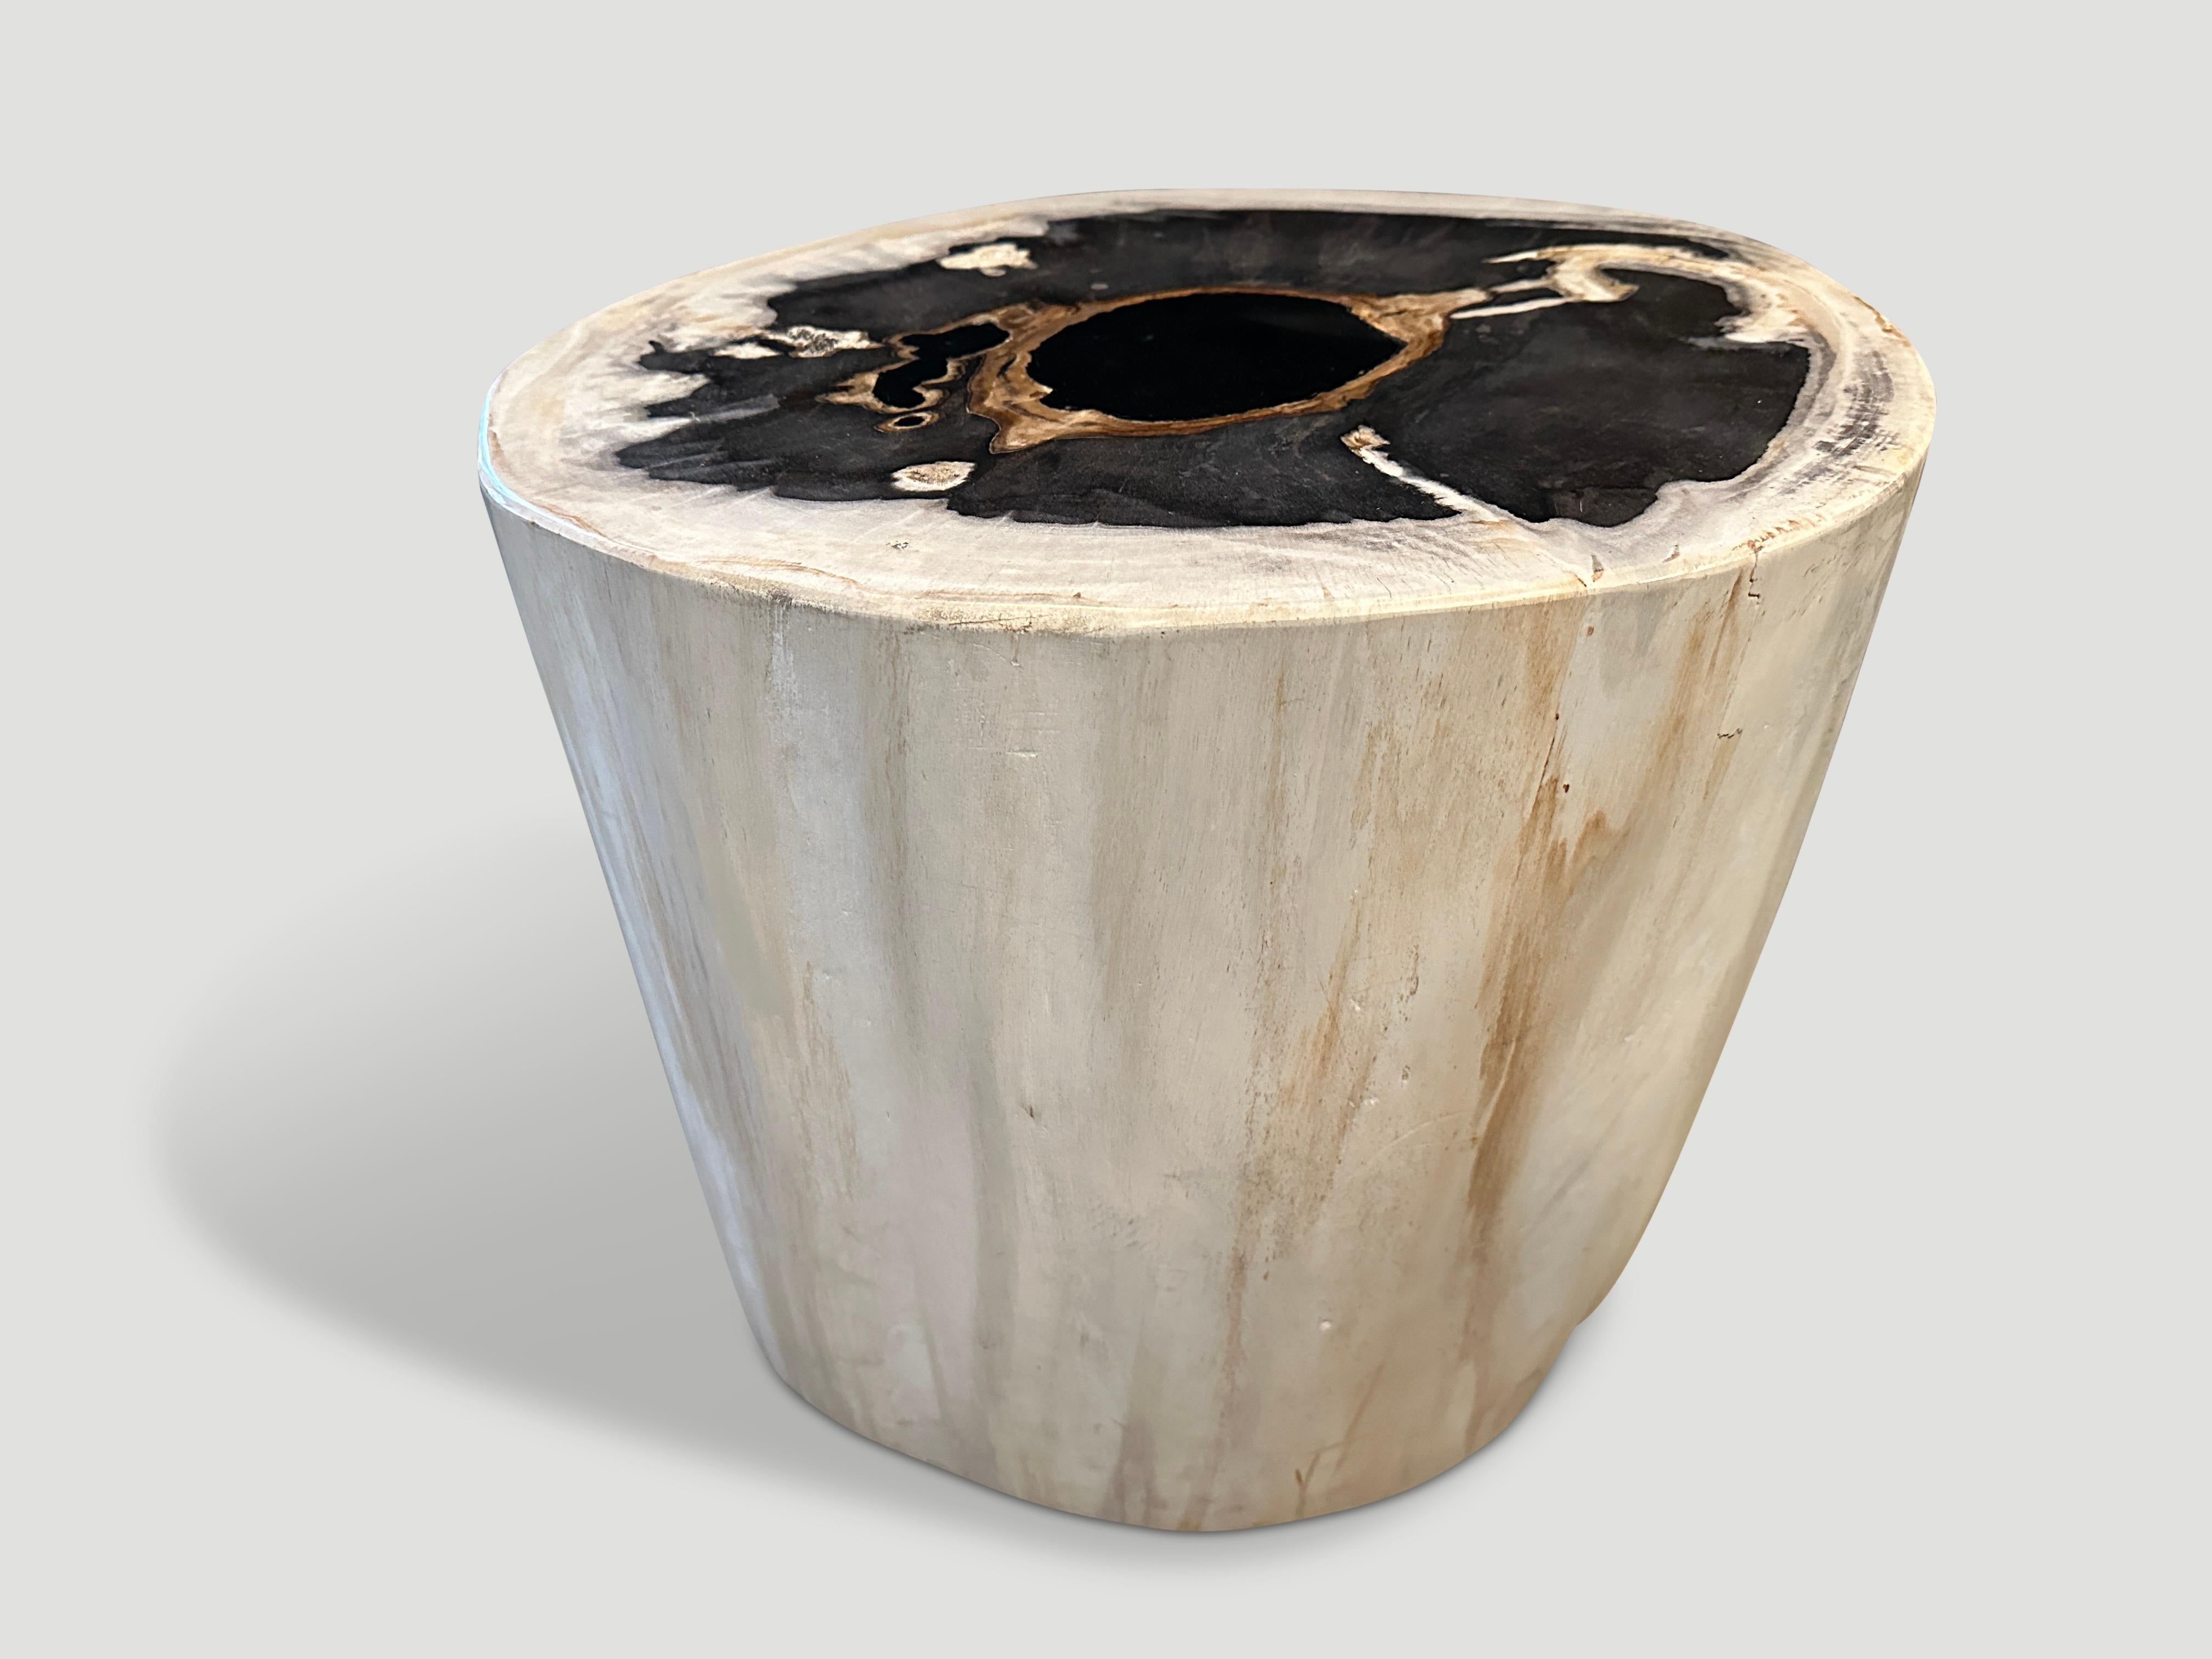 Impressive beautiful contrasting tones on this large high quality petrified wood side table. It’s fascinating how Mother Nature produces these stunning 40 million year old petrified teak logs with such contrasting colors and natural patterns